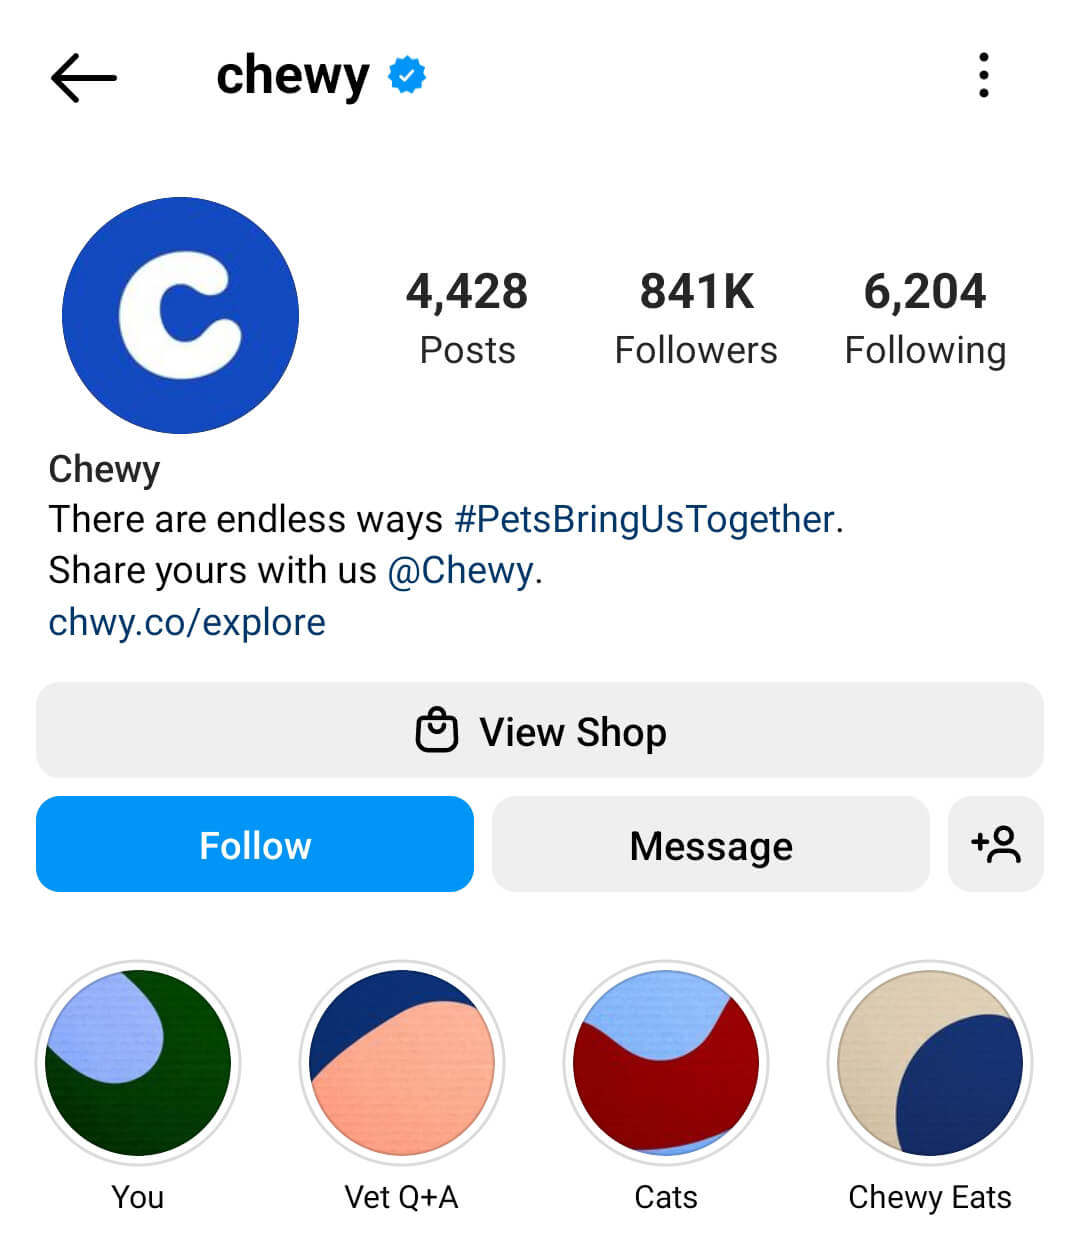 how-to-set-up-your-instagram-profile-for-brand-recognition-and-engagement-bio-includes-story-highlights-that-showcase-ugc-answer-questions-feature-popular-products-cta-chewy-example-3